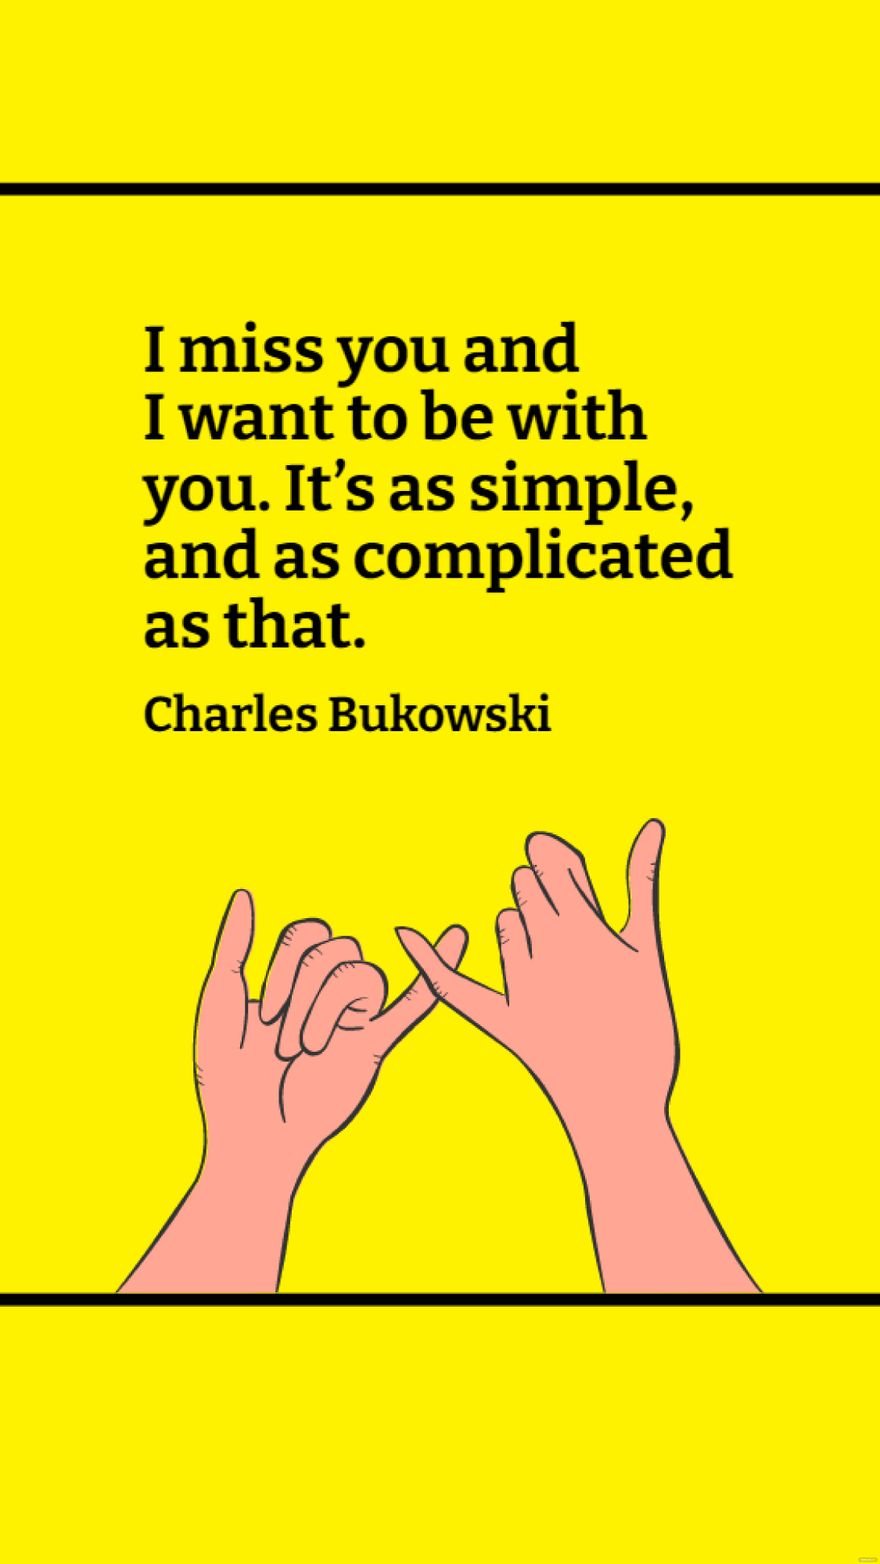 Charles Bukowski - I miss you and I want to be with you. It’s as simple, and as complicated as that.